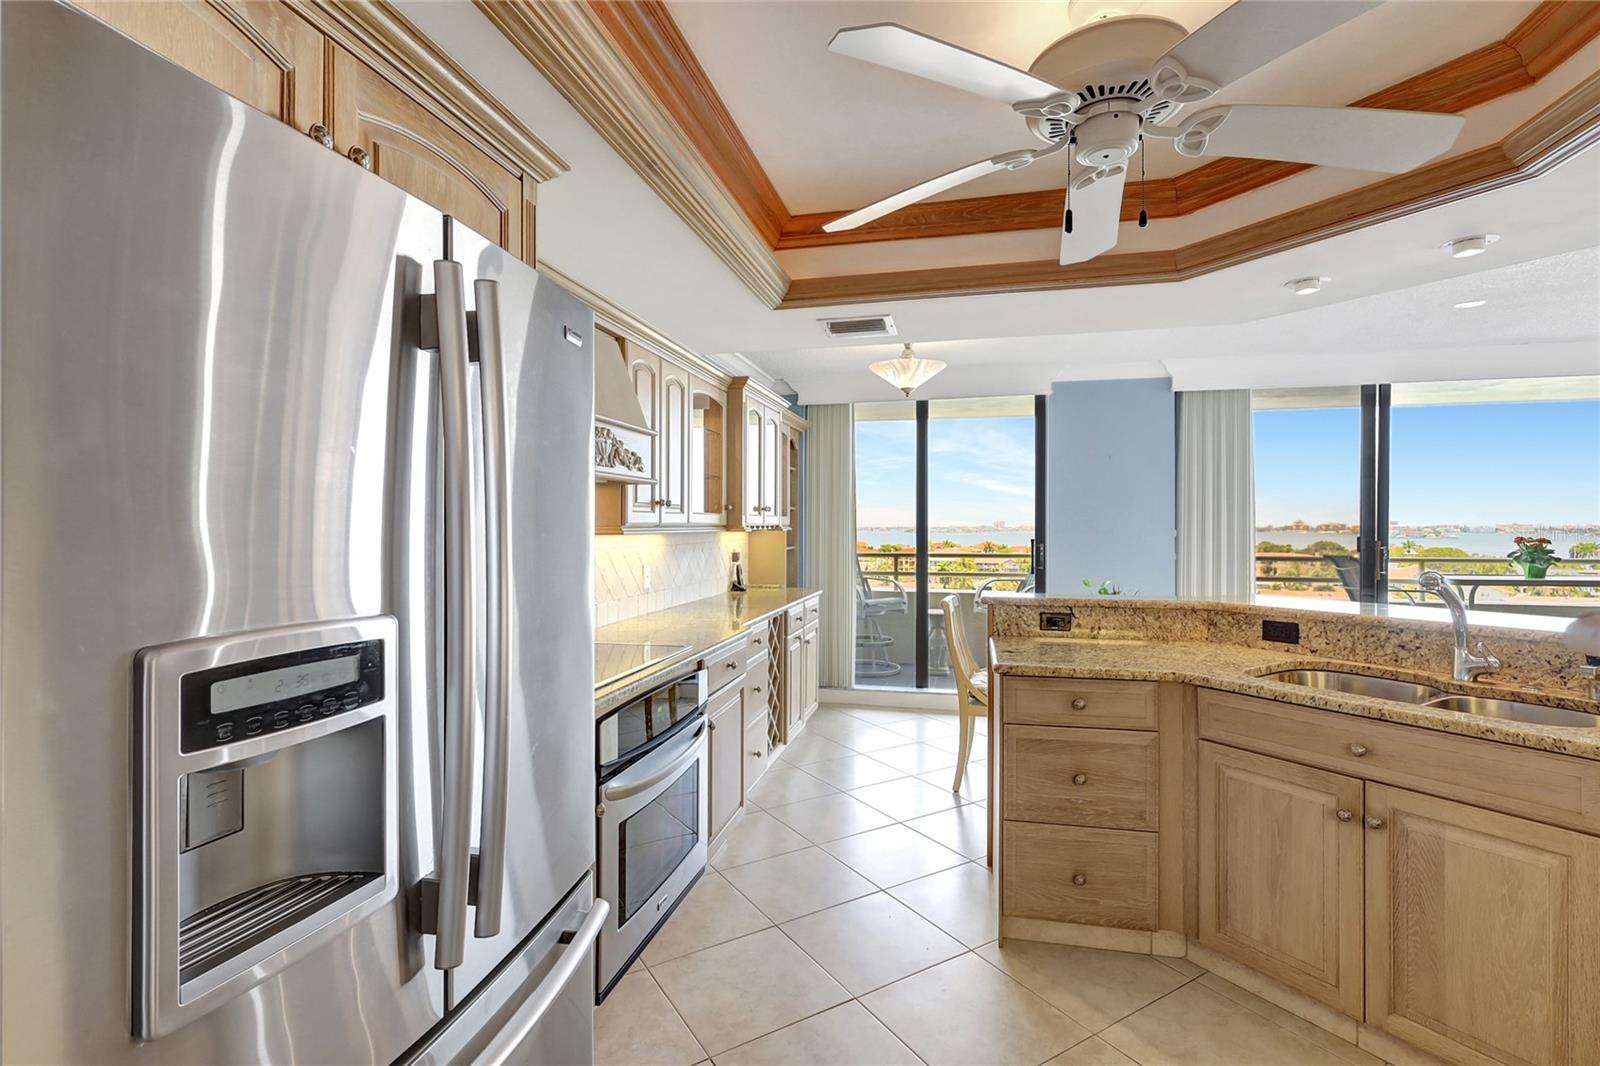 Open kitchen, panoramic water views, 75' balcony access